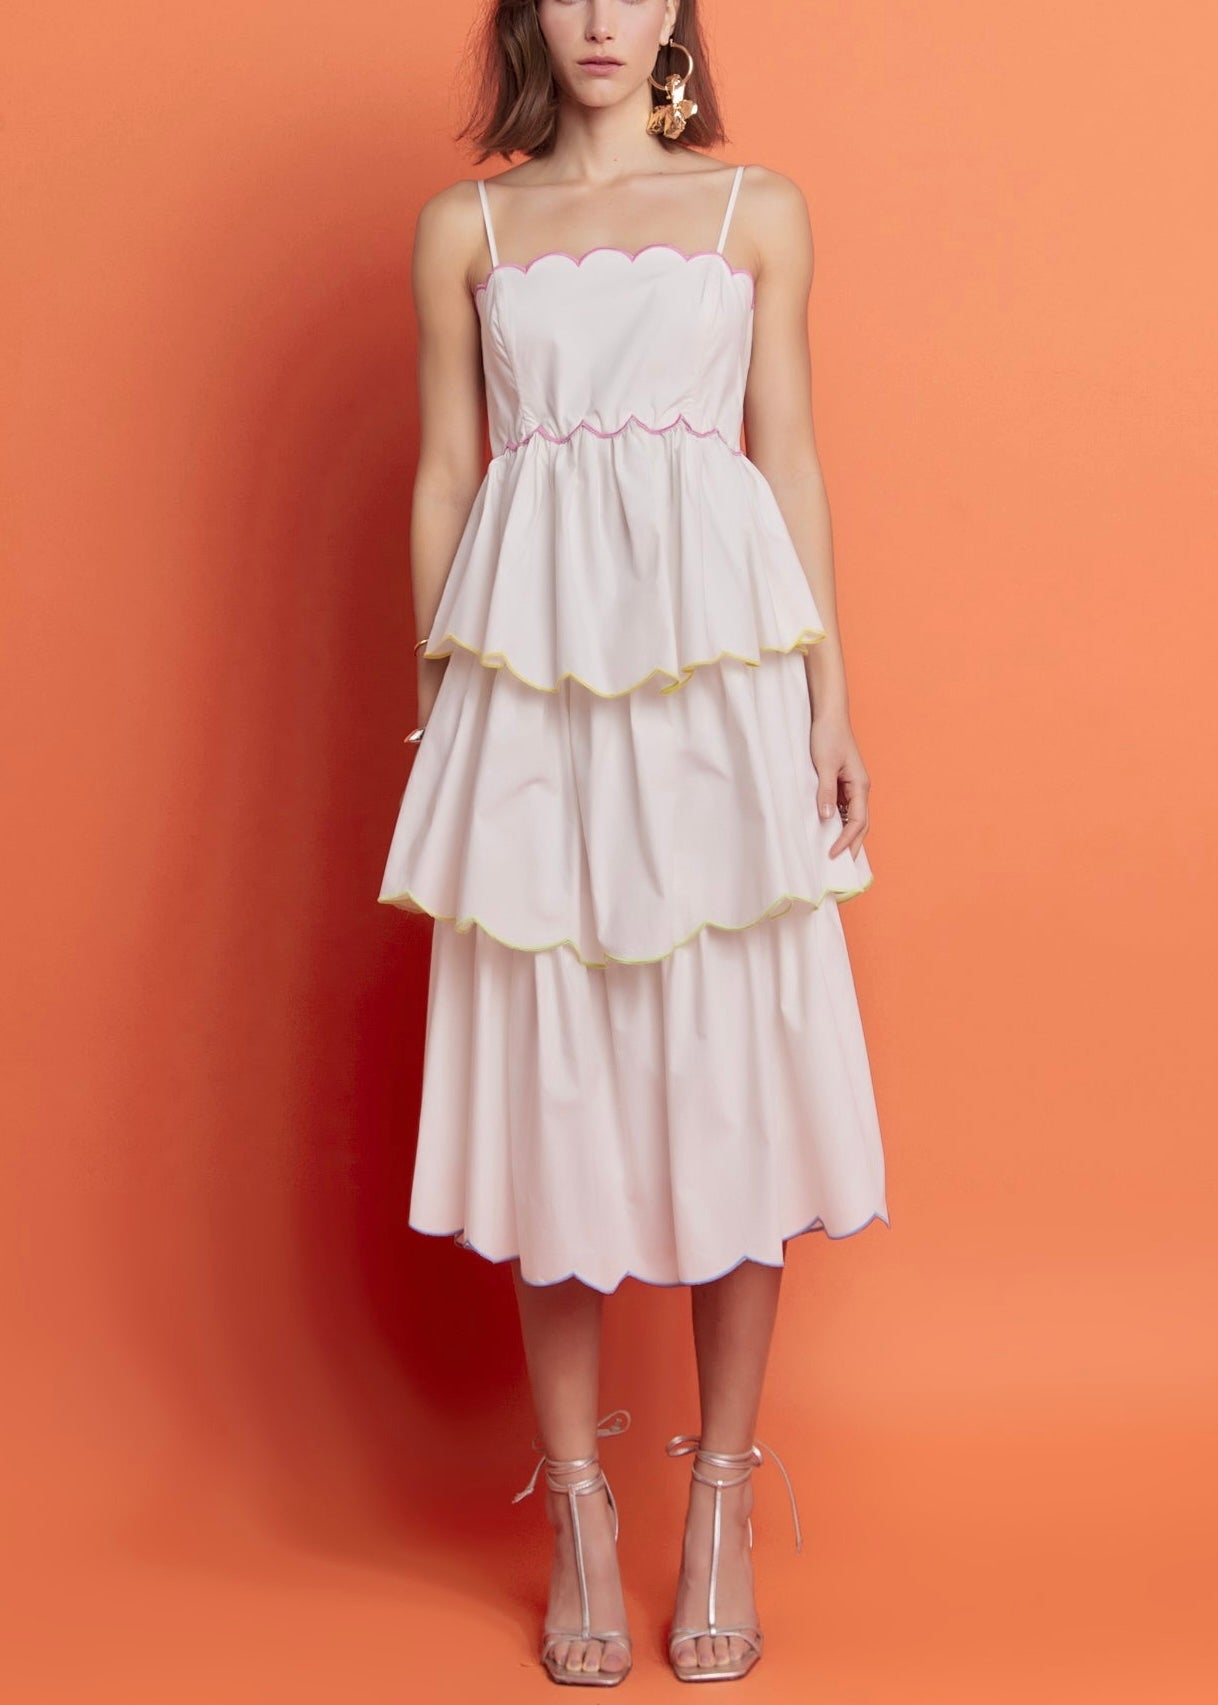 Demi Scallop Sleeveless Tiered Dress in White by English Factory